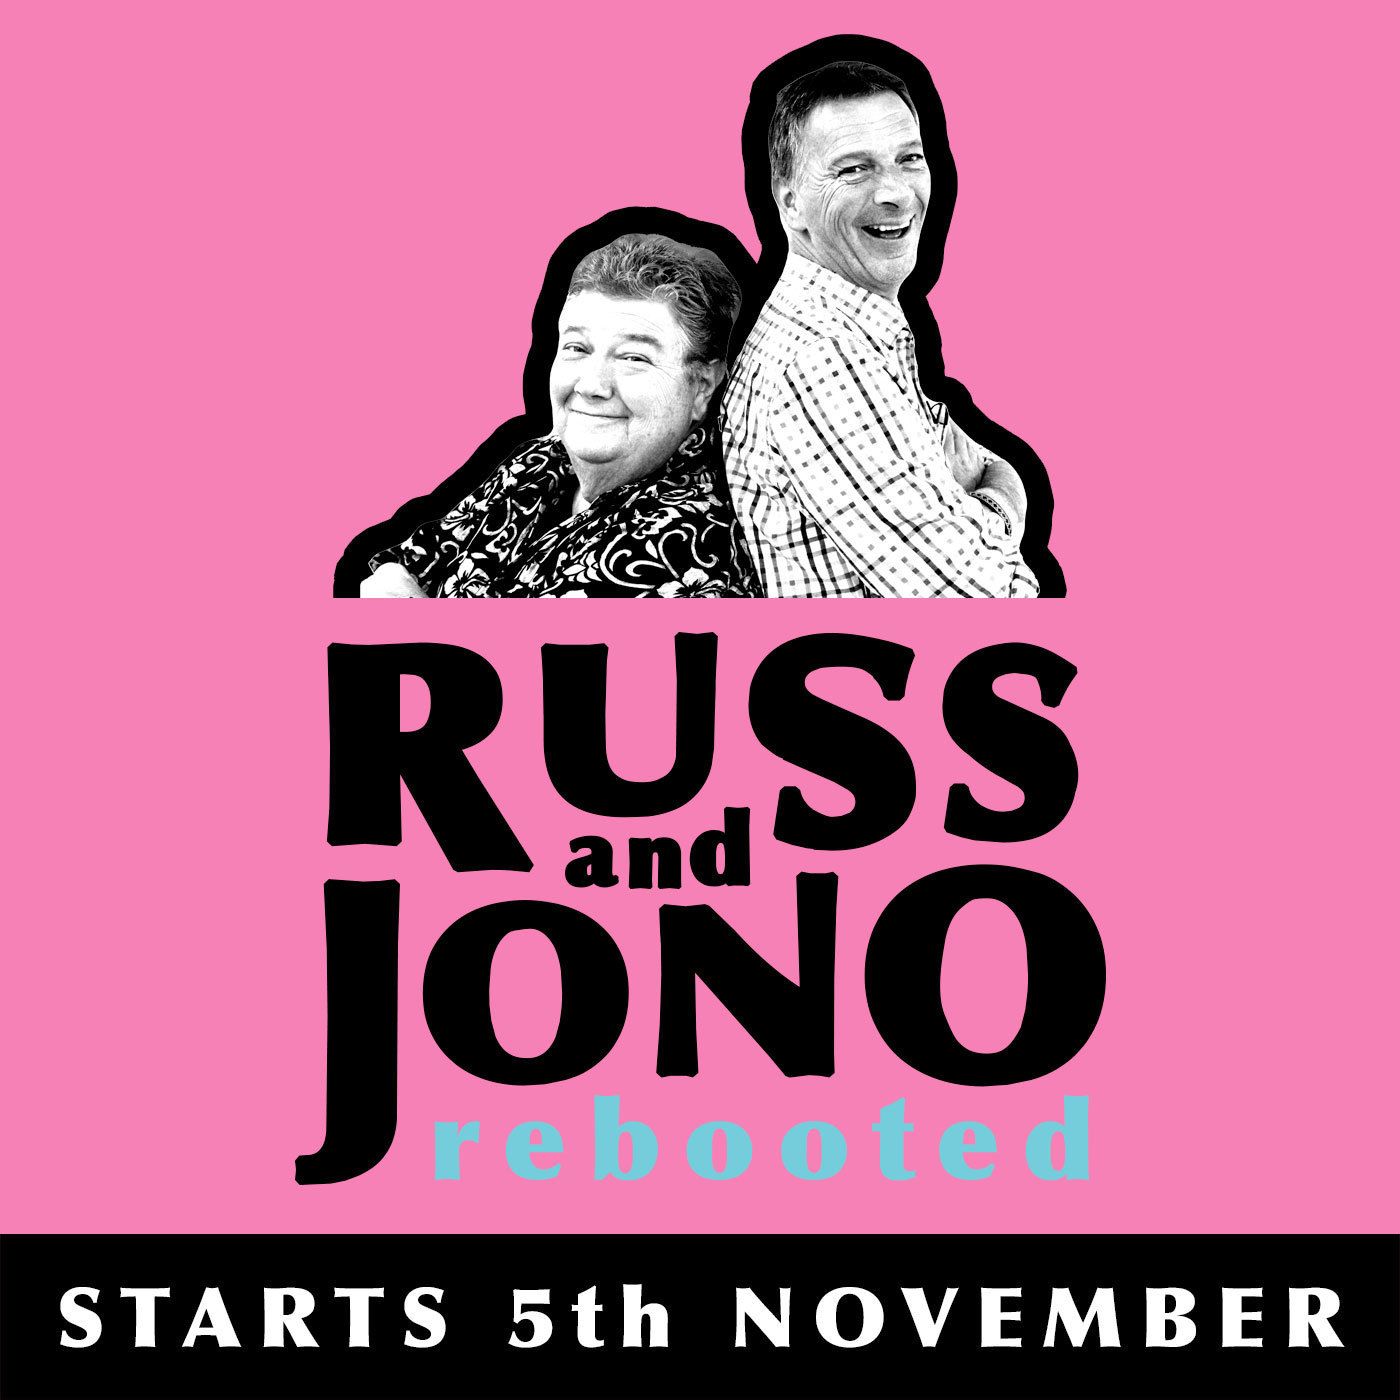 S1 Ep5: Russ and Jono Rebooted - seriously not long to wait now